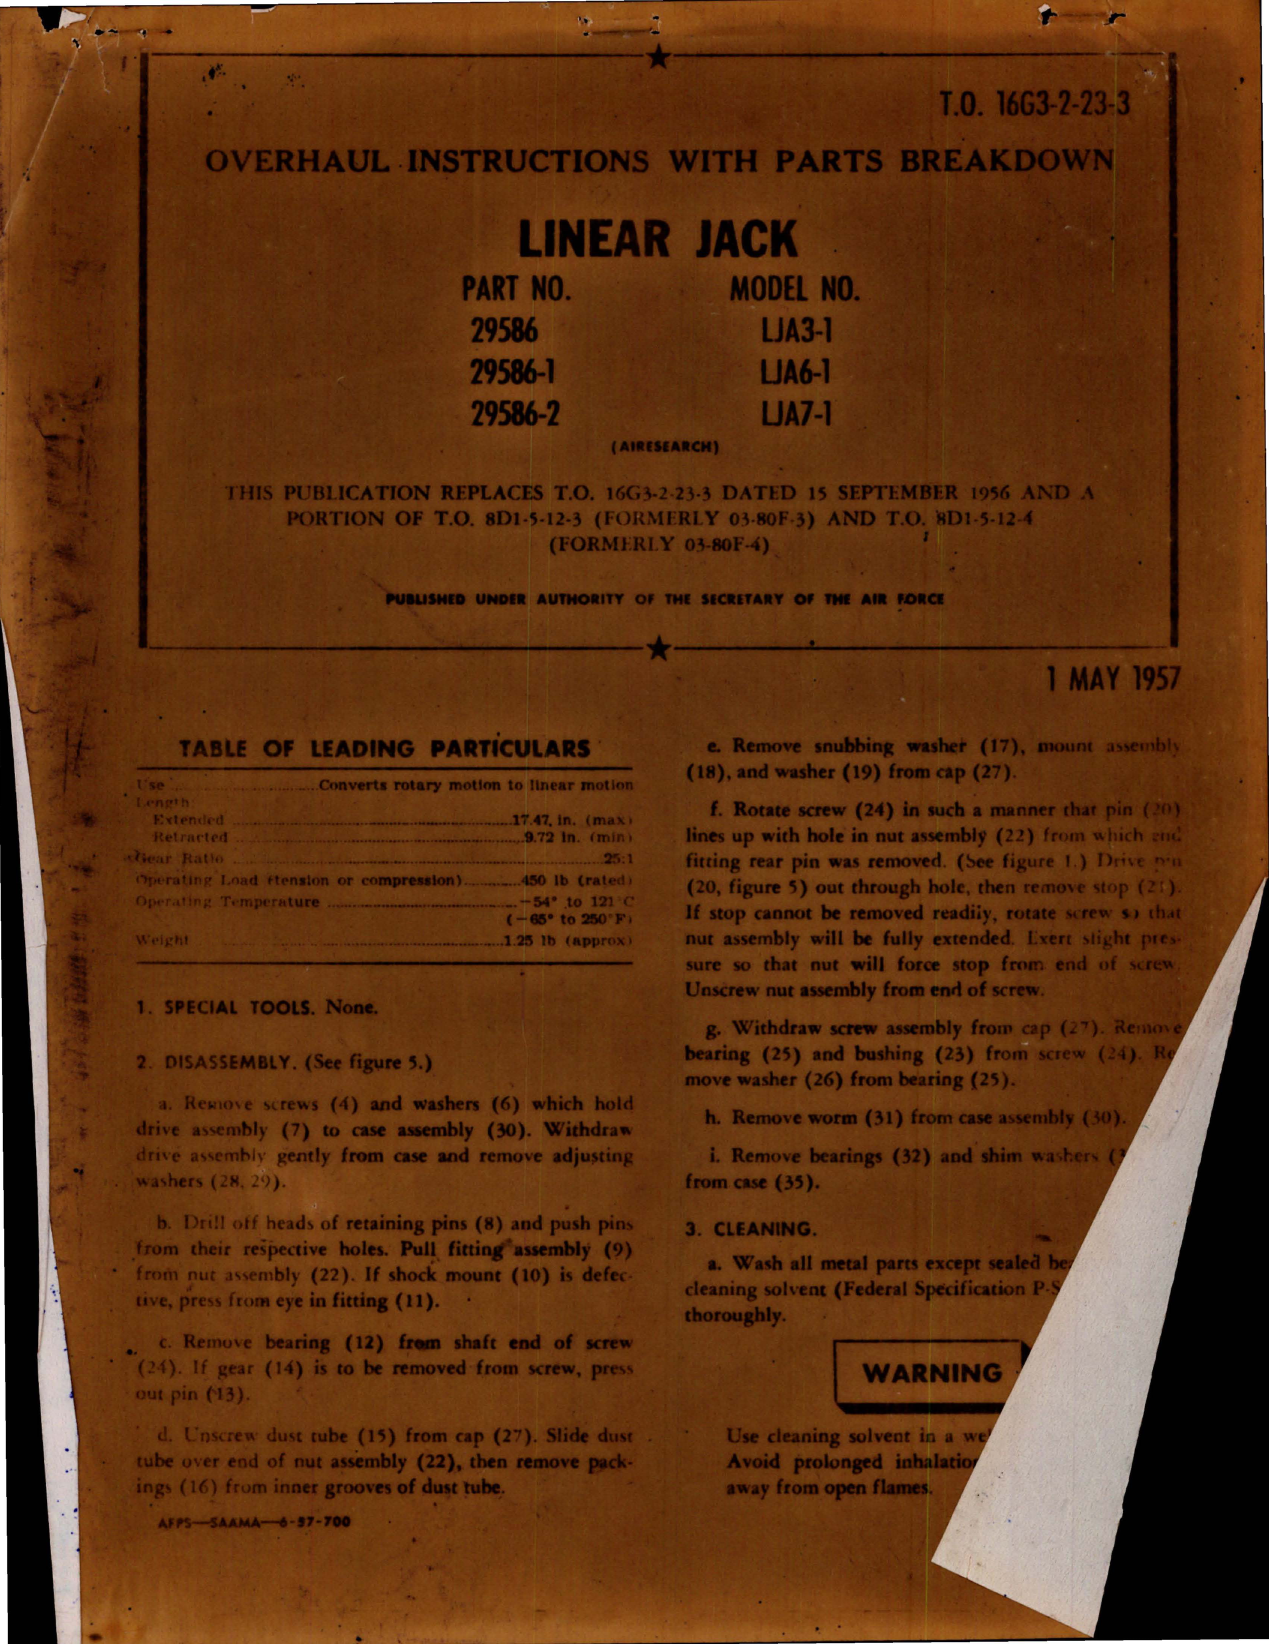 Sample page 1 from AirCorps Library document: Overhaul Instructions with Parts for Linear Jack Parts 29586, 29586-1 and 29586-2 